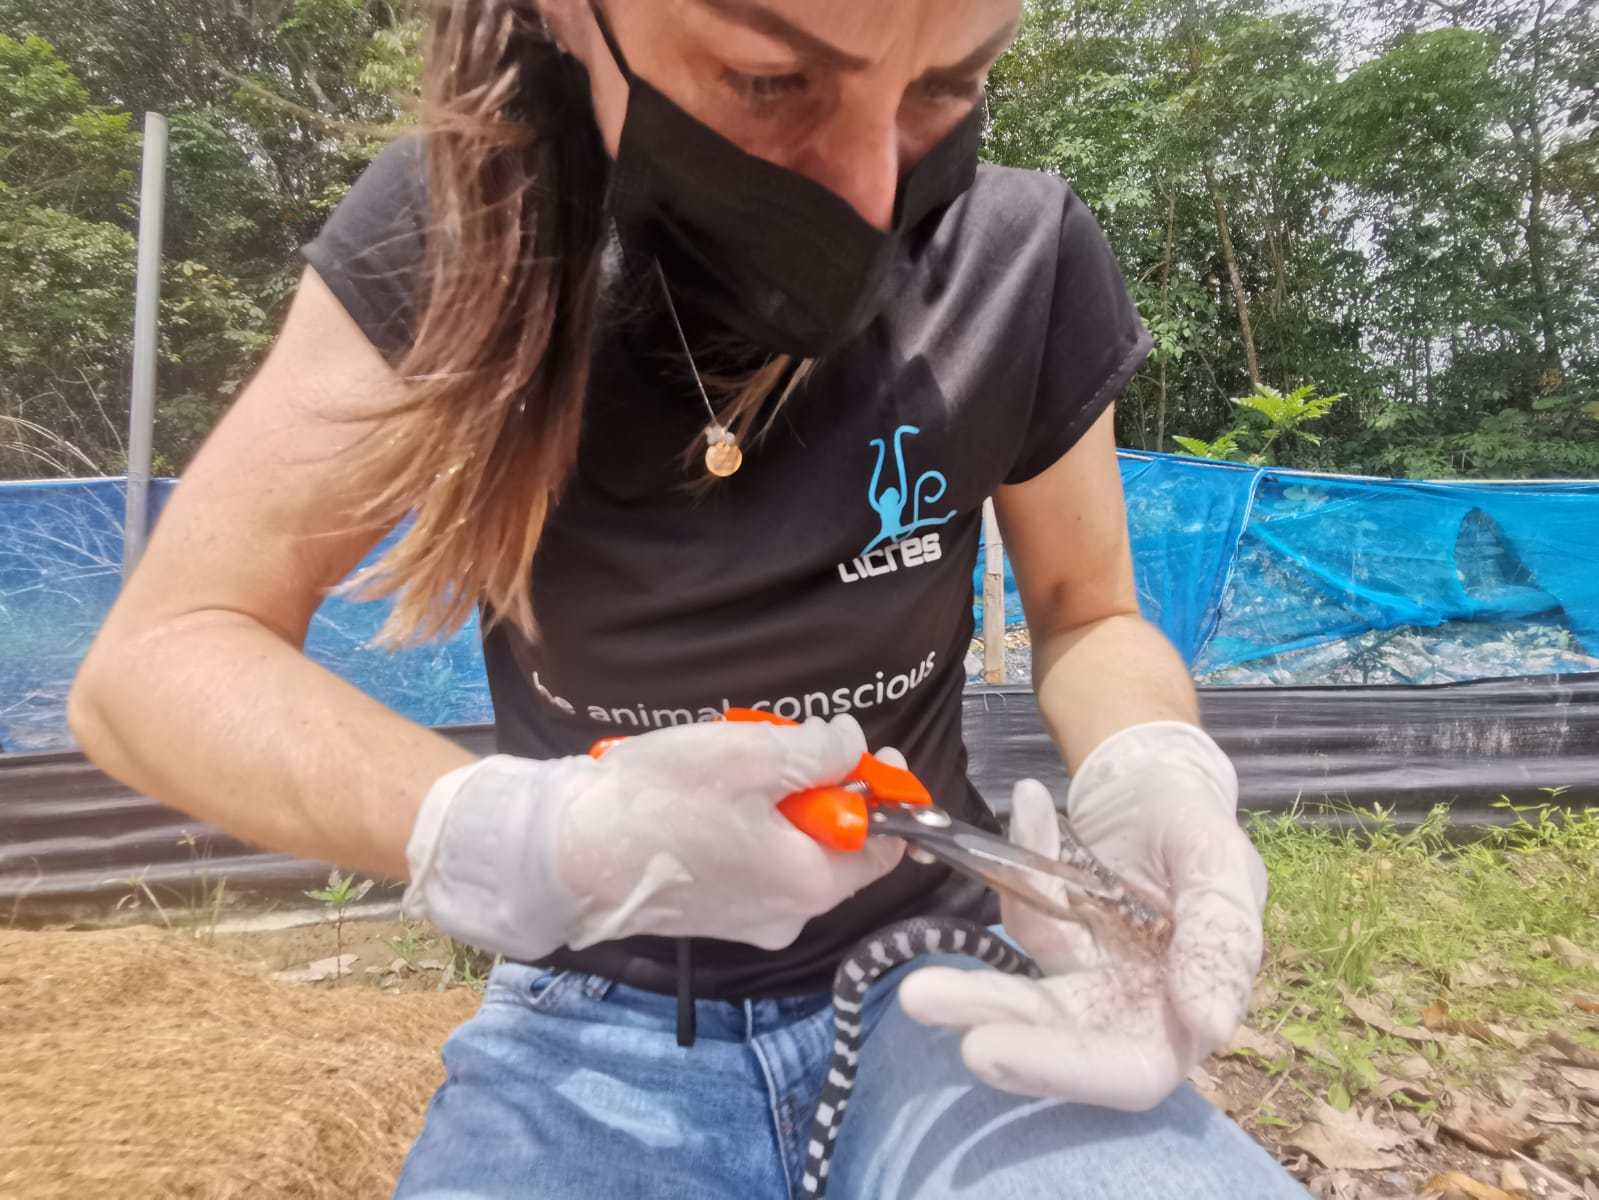 An ACRES volunteer frees a red-tailed pipe snake on Jan. 28, 2020 in Choa Chu Kang. Photo: ACRES